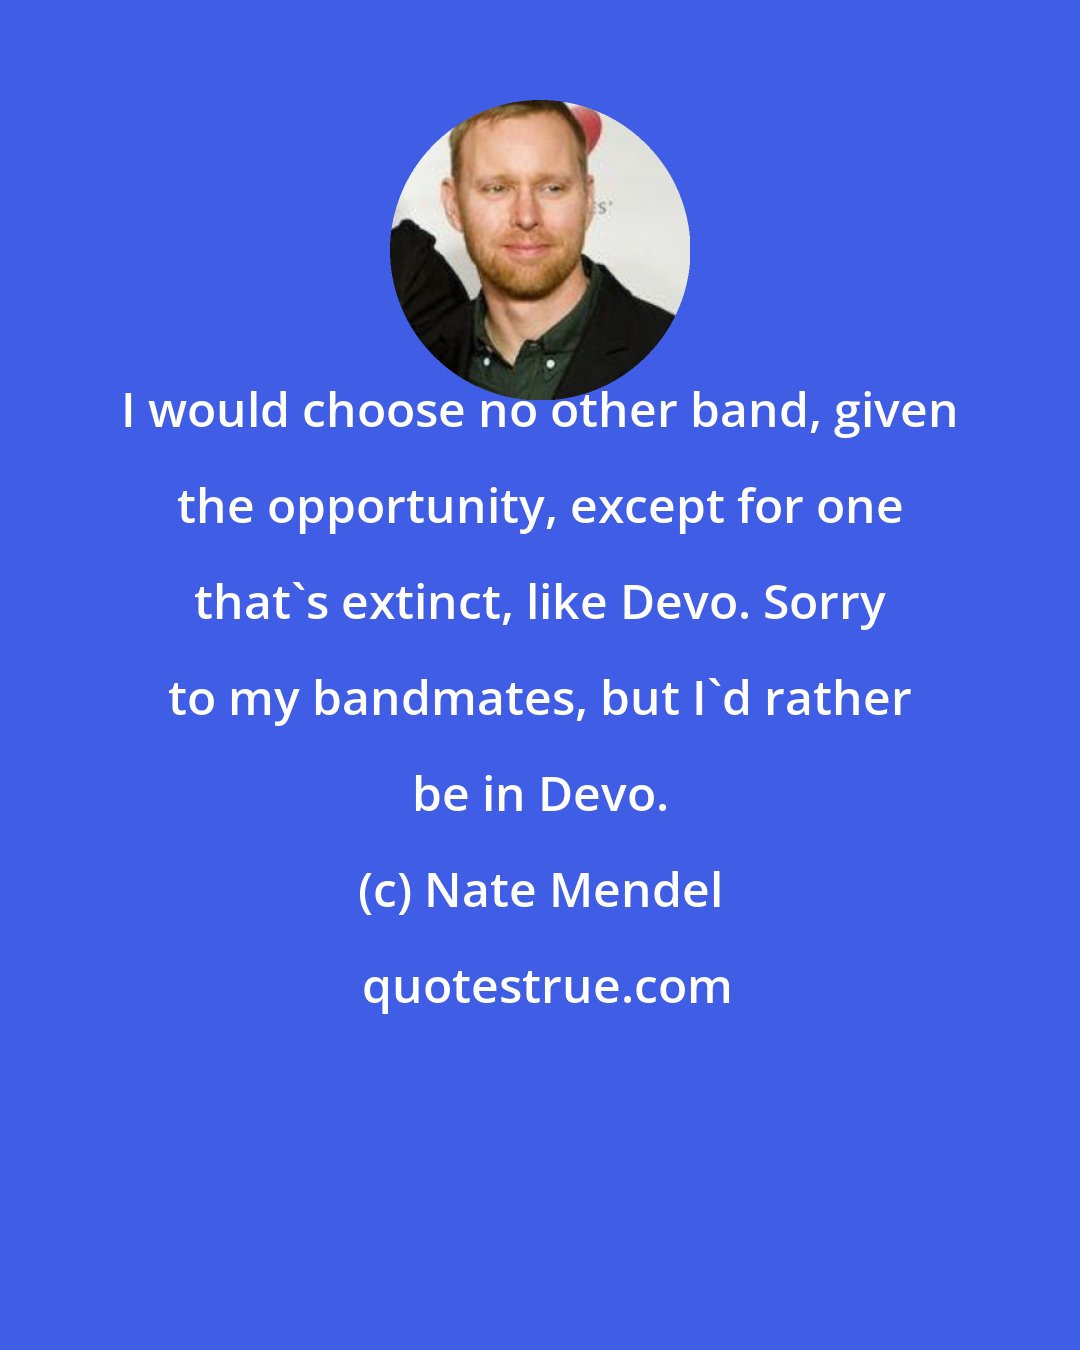 Nate Mendel: I would choose no other band, given the opportunity, except for one that's extinct, like Devo. Sorry to my bandmates, but I'd rather be in Devo.